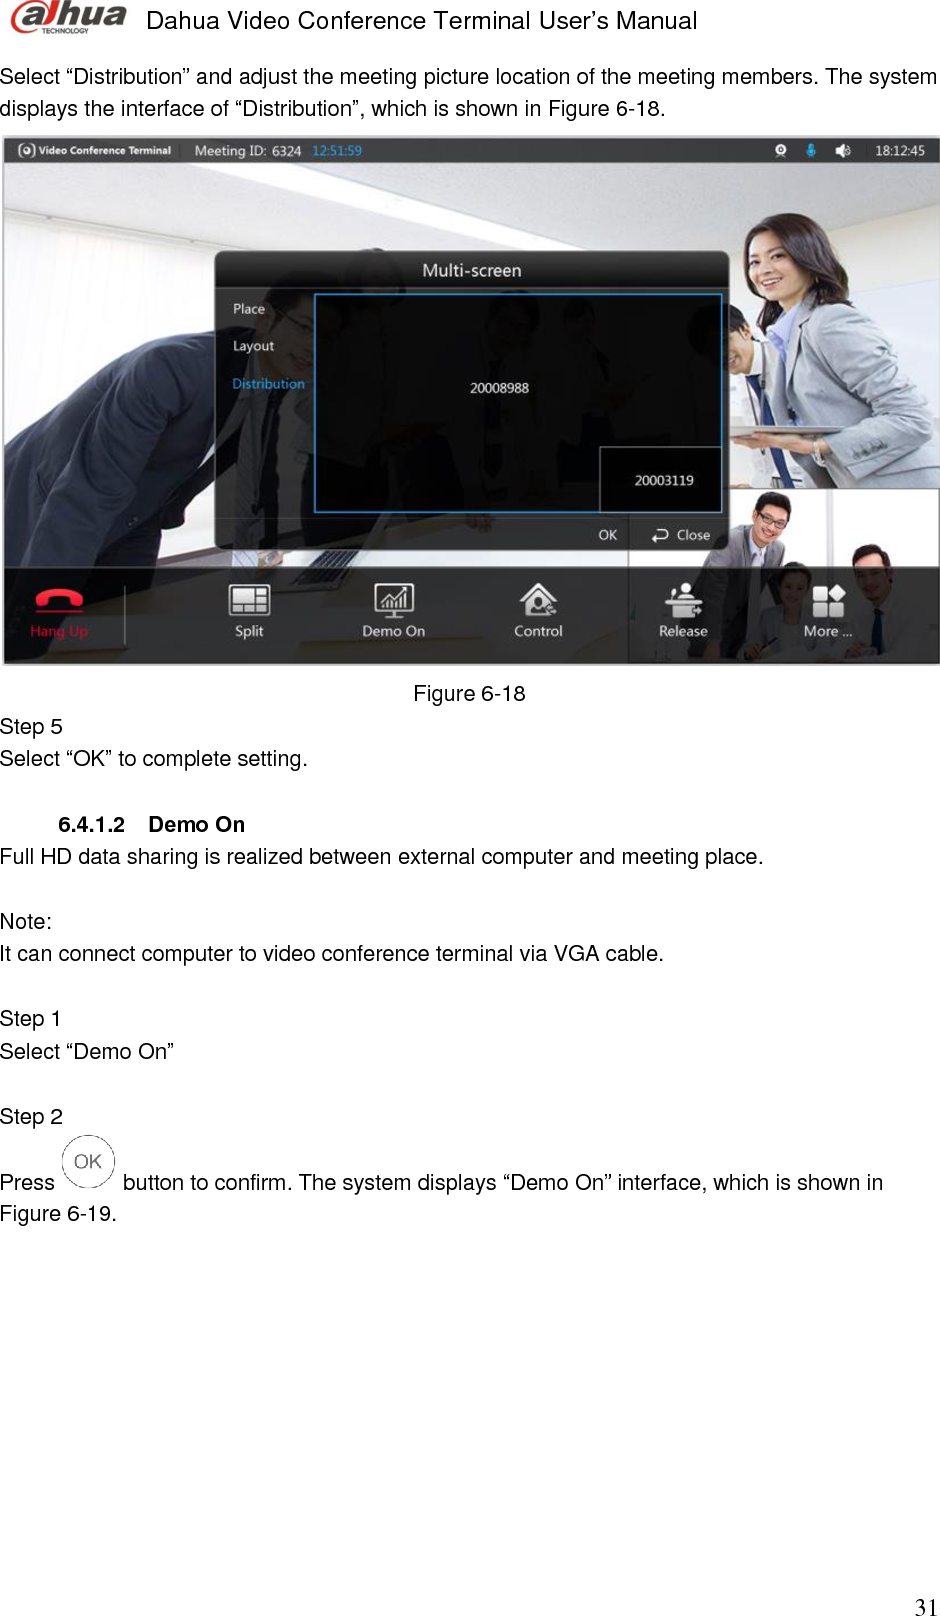  Dahua Video Conference Terminal User’s Manual                                                                              31 Select “Distribution” and adjust the meeting picture location of the meeting members. The system displays the interface of “Distribution”, which is shown in Figure 6-18.   Figure 6-18 Step 5  Select “OK” to complete setting.   6.4.1.2  Demo On Full HD data sharing is realized between external computer and meeting place.  Note:  It can connect computer to video conference terminal via VGA cable.   Step 1  Select “Demo On”   Step 2  Press   button to confirm. The system displays “Demo On” interface, which is shown in Figure 6-19.  